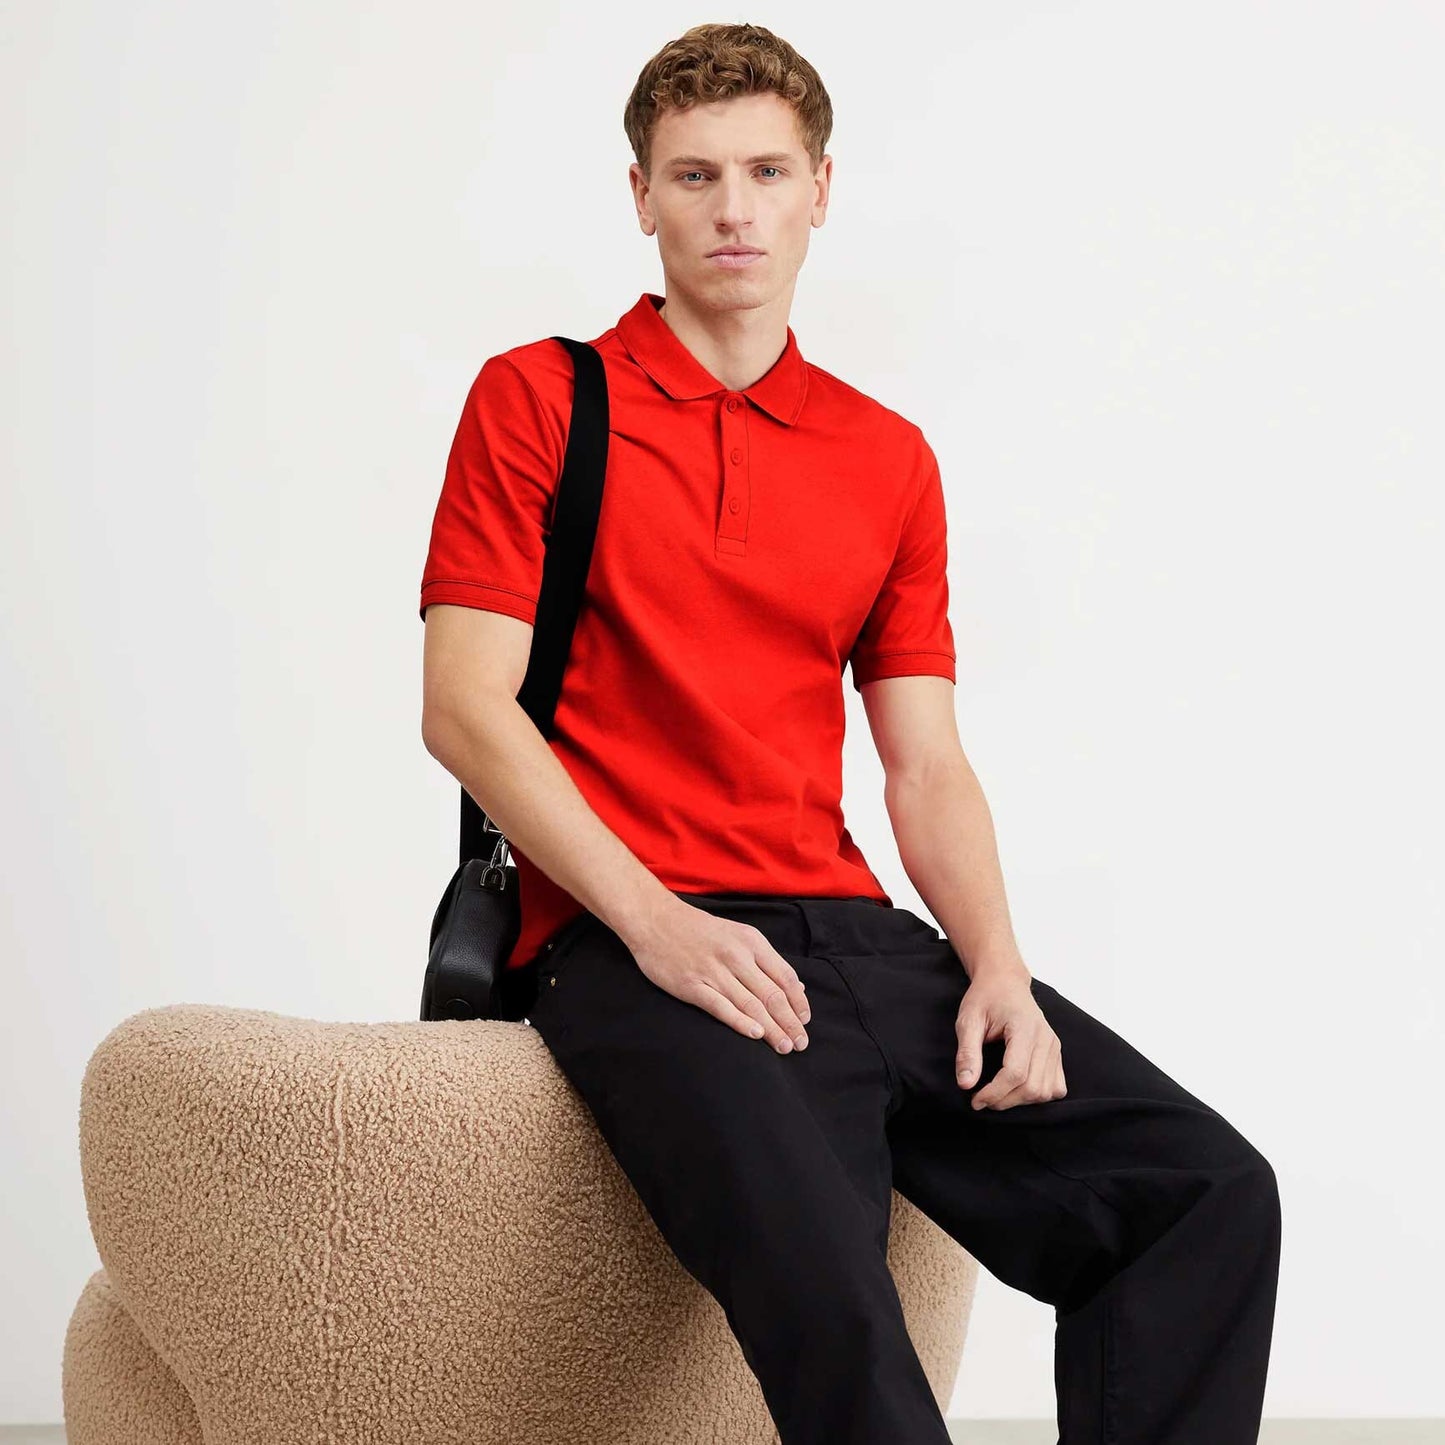 Platic Men's Short Sleeve with Minor Fault Polo Shirt Minor Fault Image Red XS 